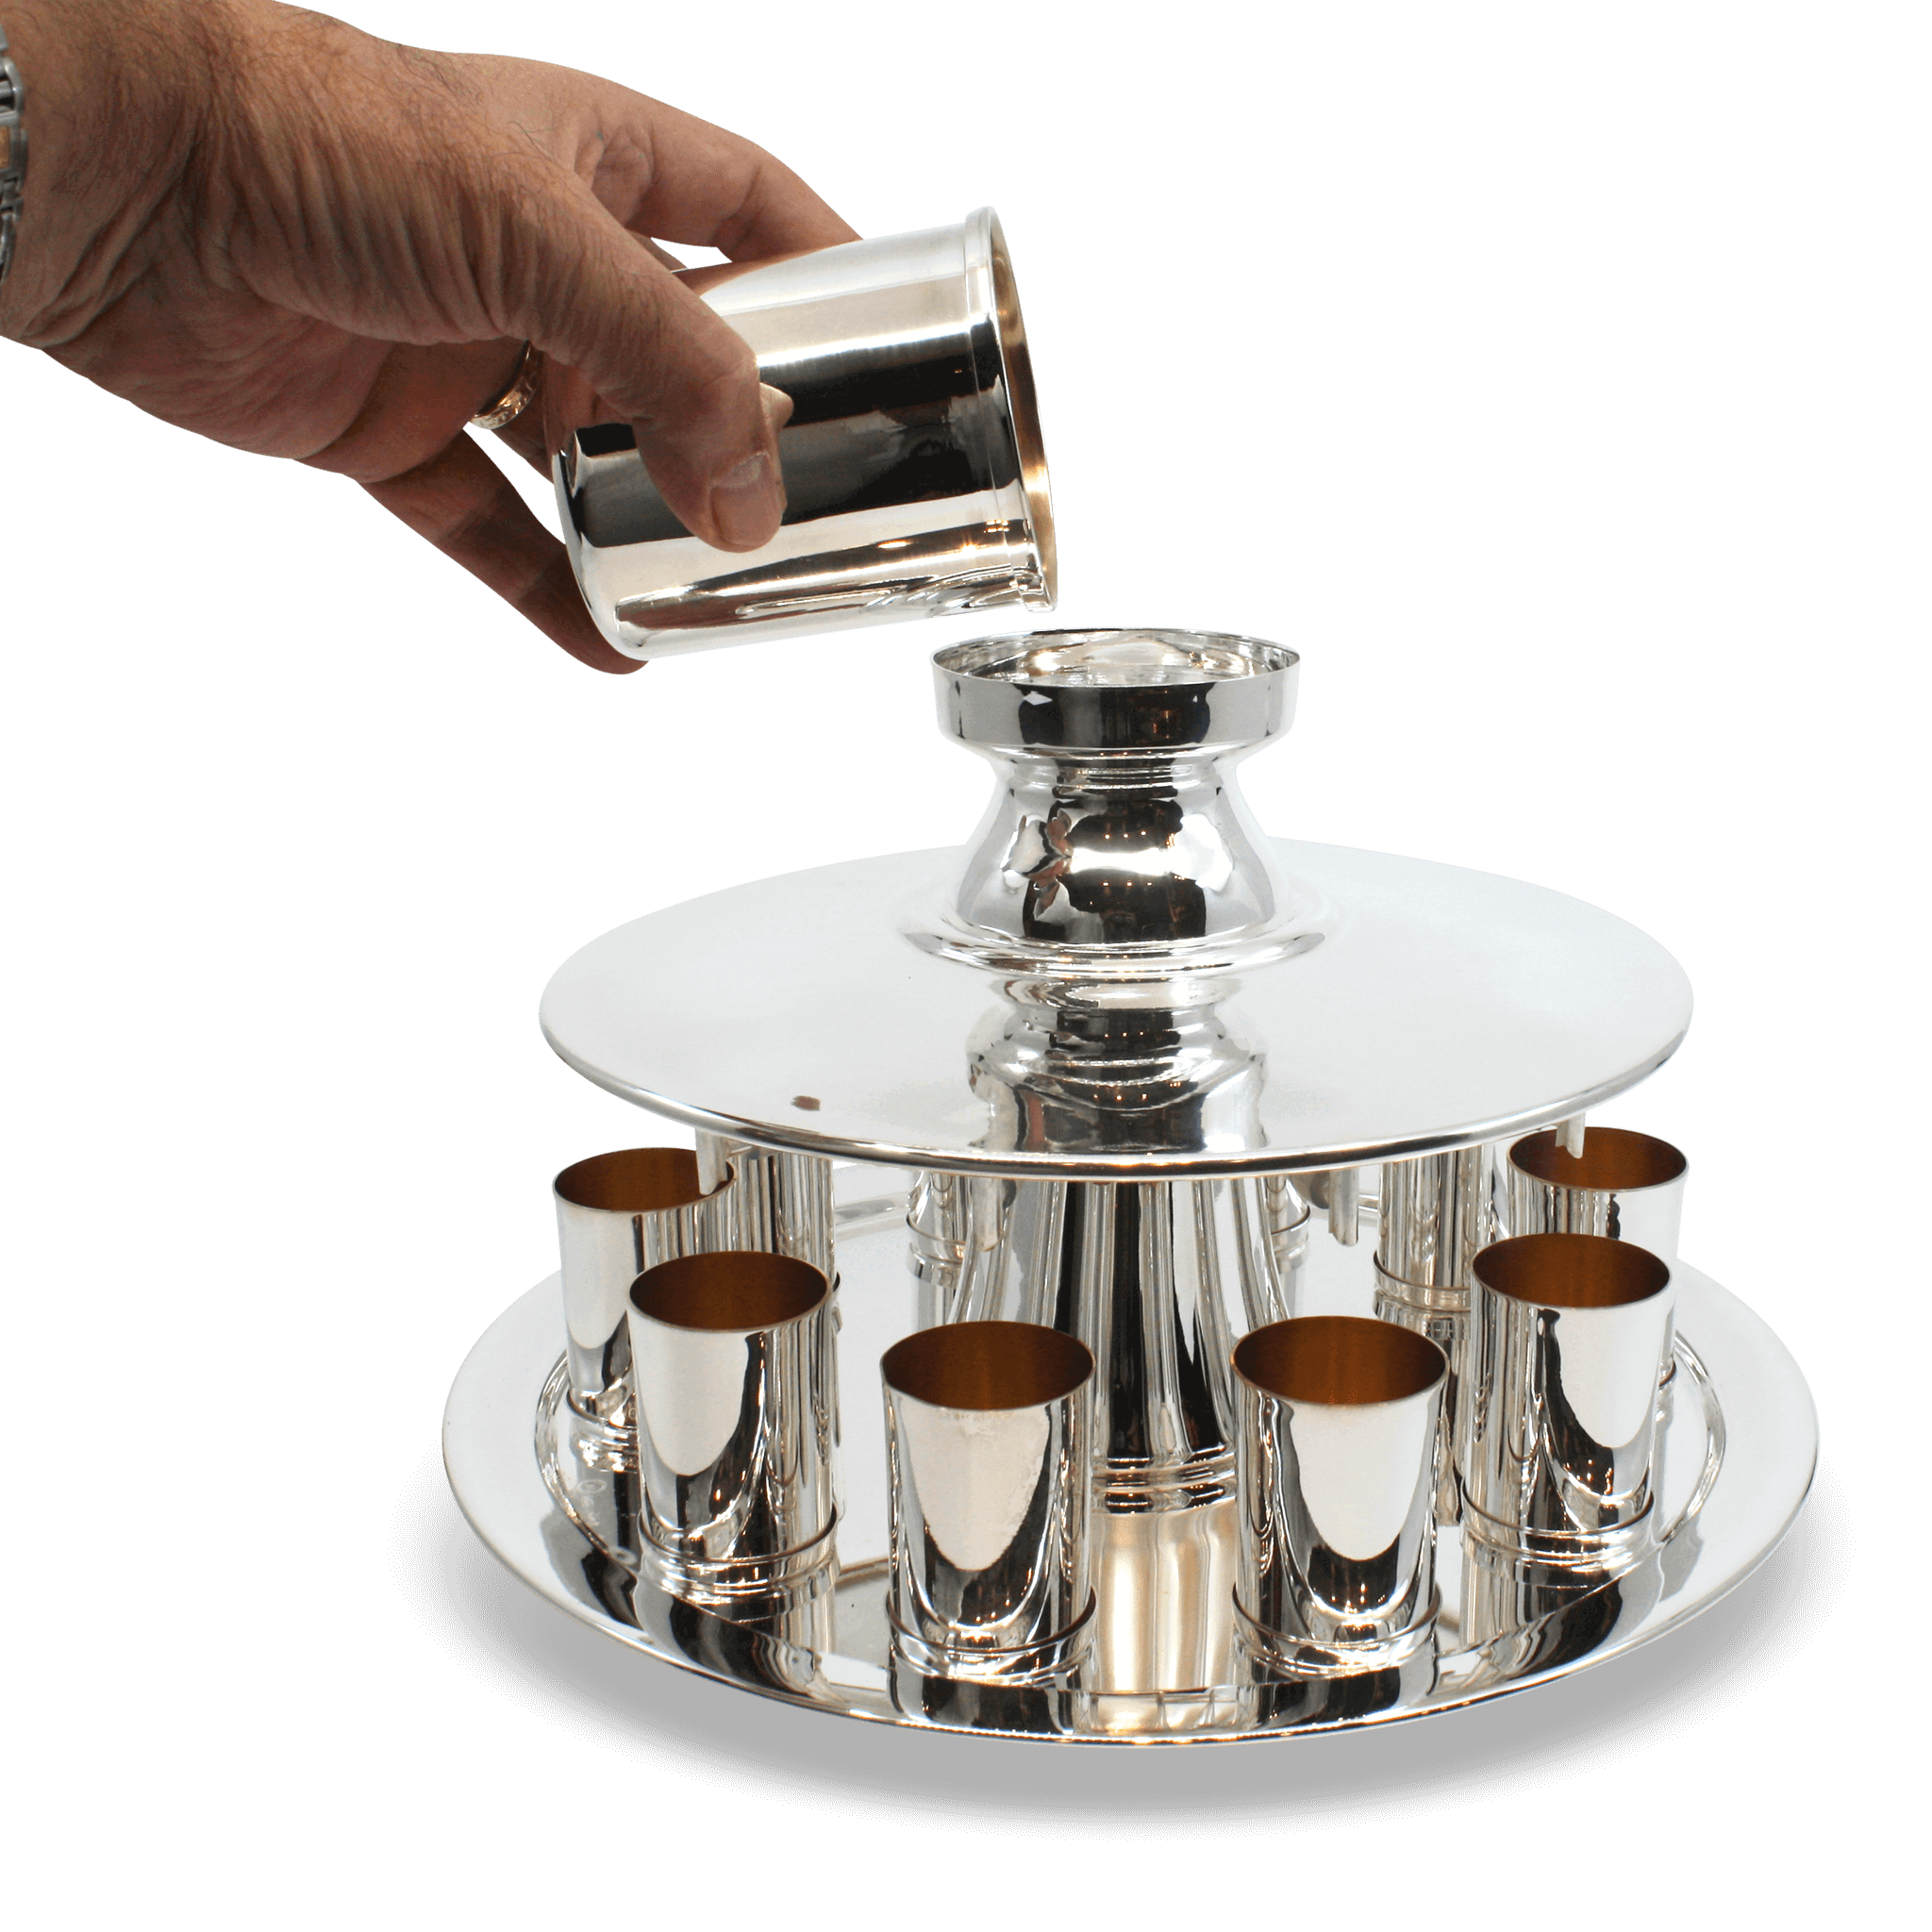 SILVER WINE FOUNTAIN FOR 10 A - Piece By Zion Hadad